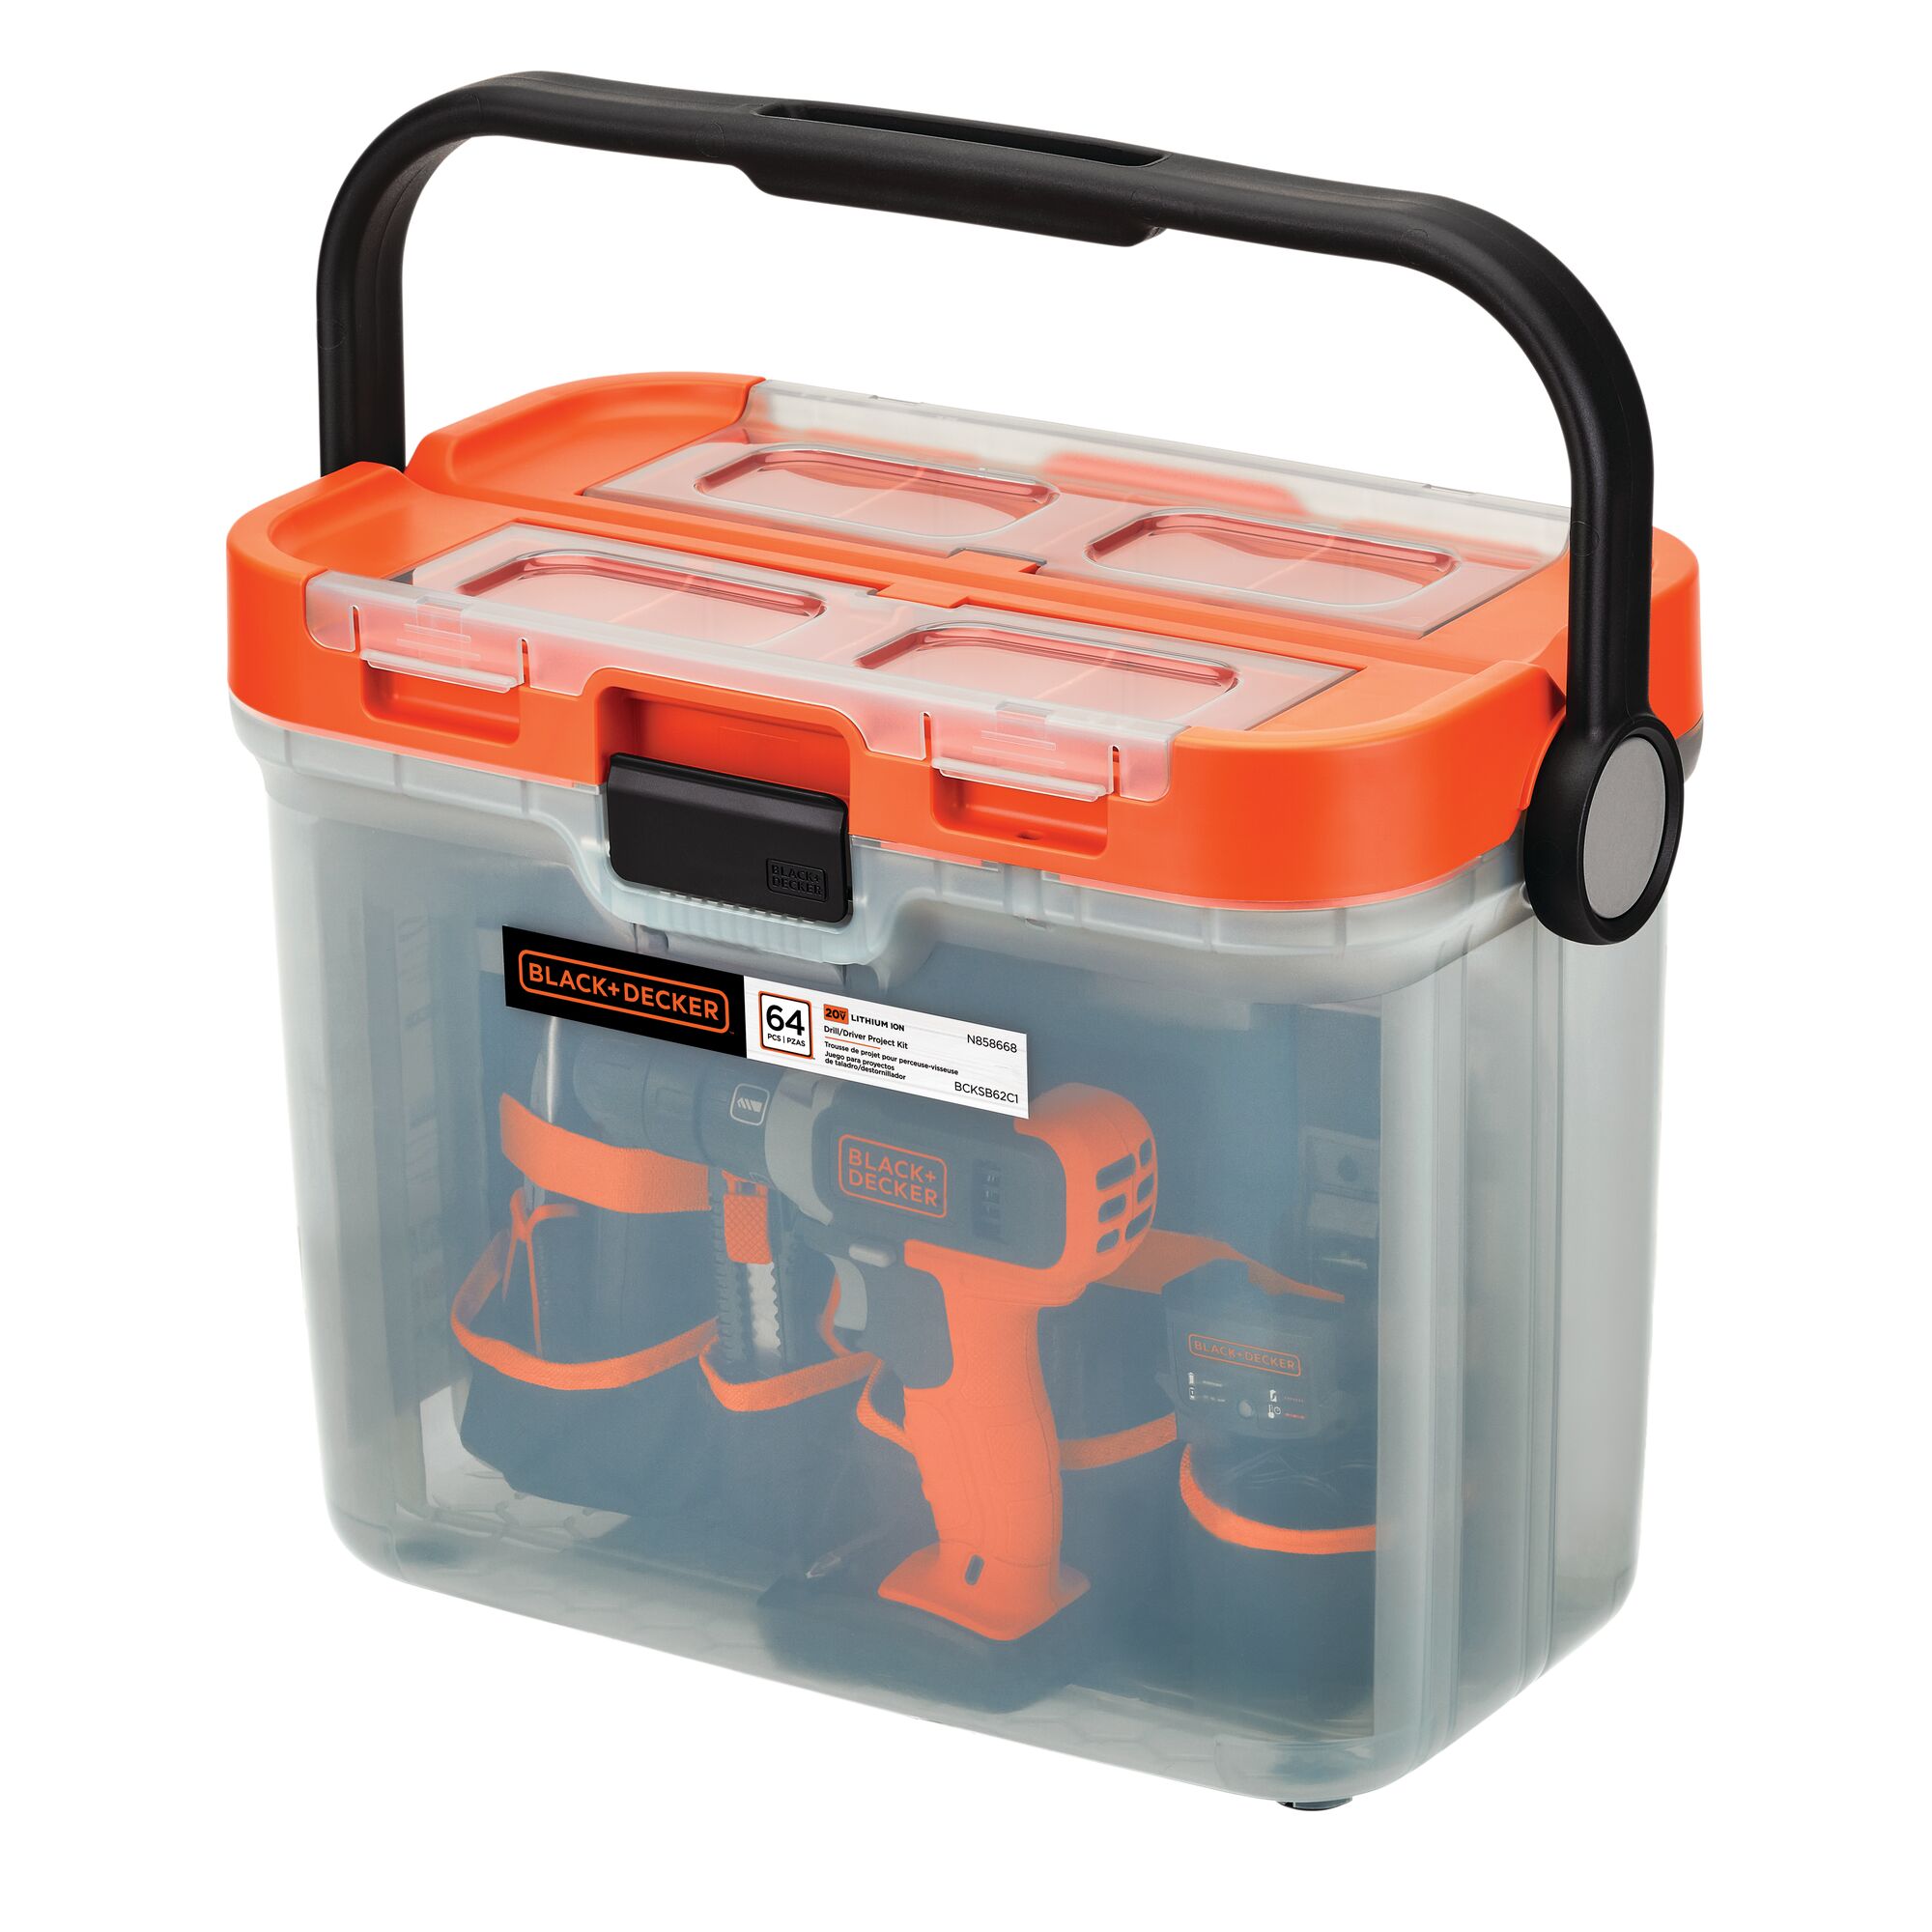 Drill with 63 piece Hand Tool and Accessory Home Project Kit in translucent tool box.